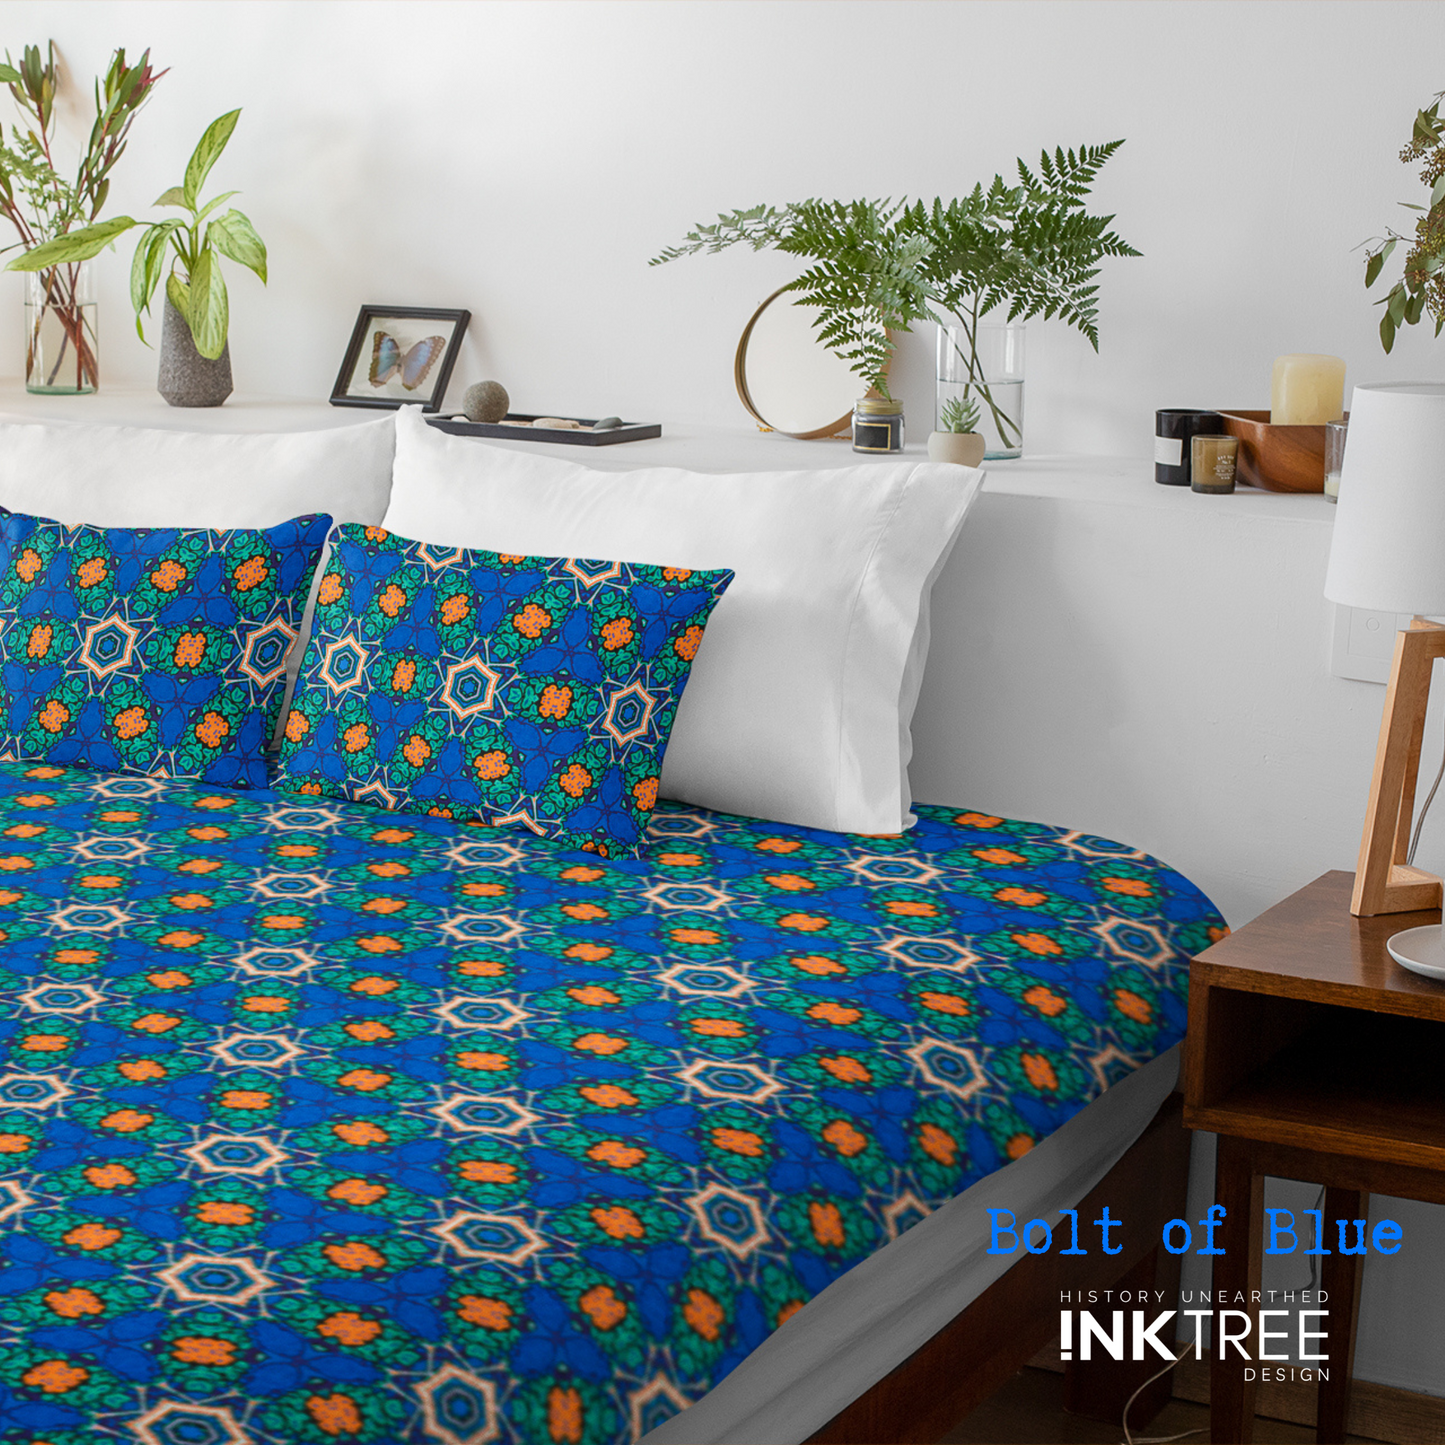 A doona cover and front pillows with an orange, white, black, blue and green pattern on a bed with a white wall, white pillows and white backboard background. There is a lamp with a white shade and wood base and plants and a small round metal mirror on the back board. There is also a bolt of blue, history unearthed ink tree design logo in the bottom right hand corner on it.